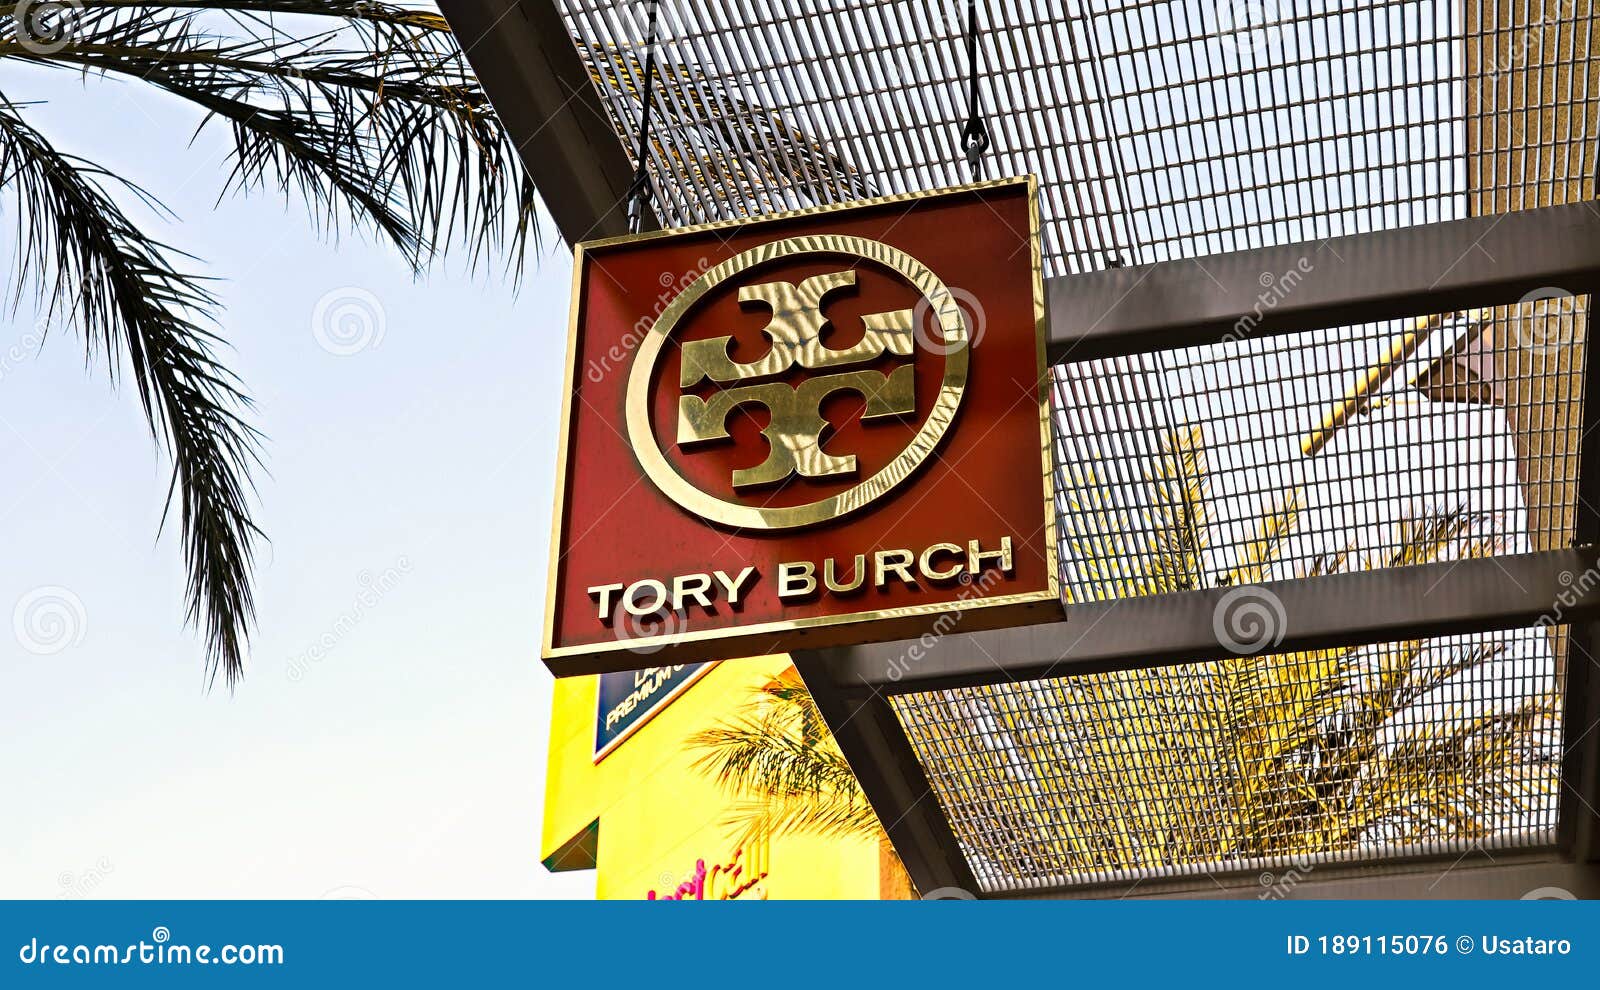 Tory Burch Logo on Store Front Sign Editorial Photo - Image of ...